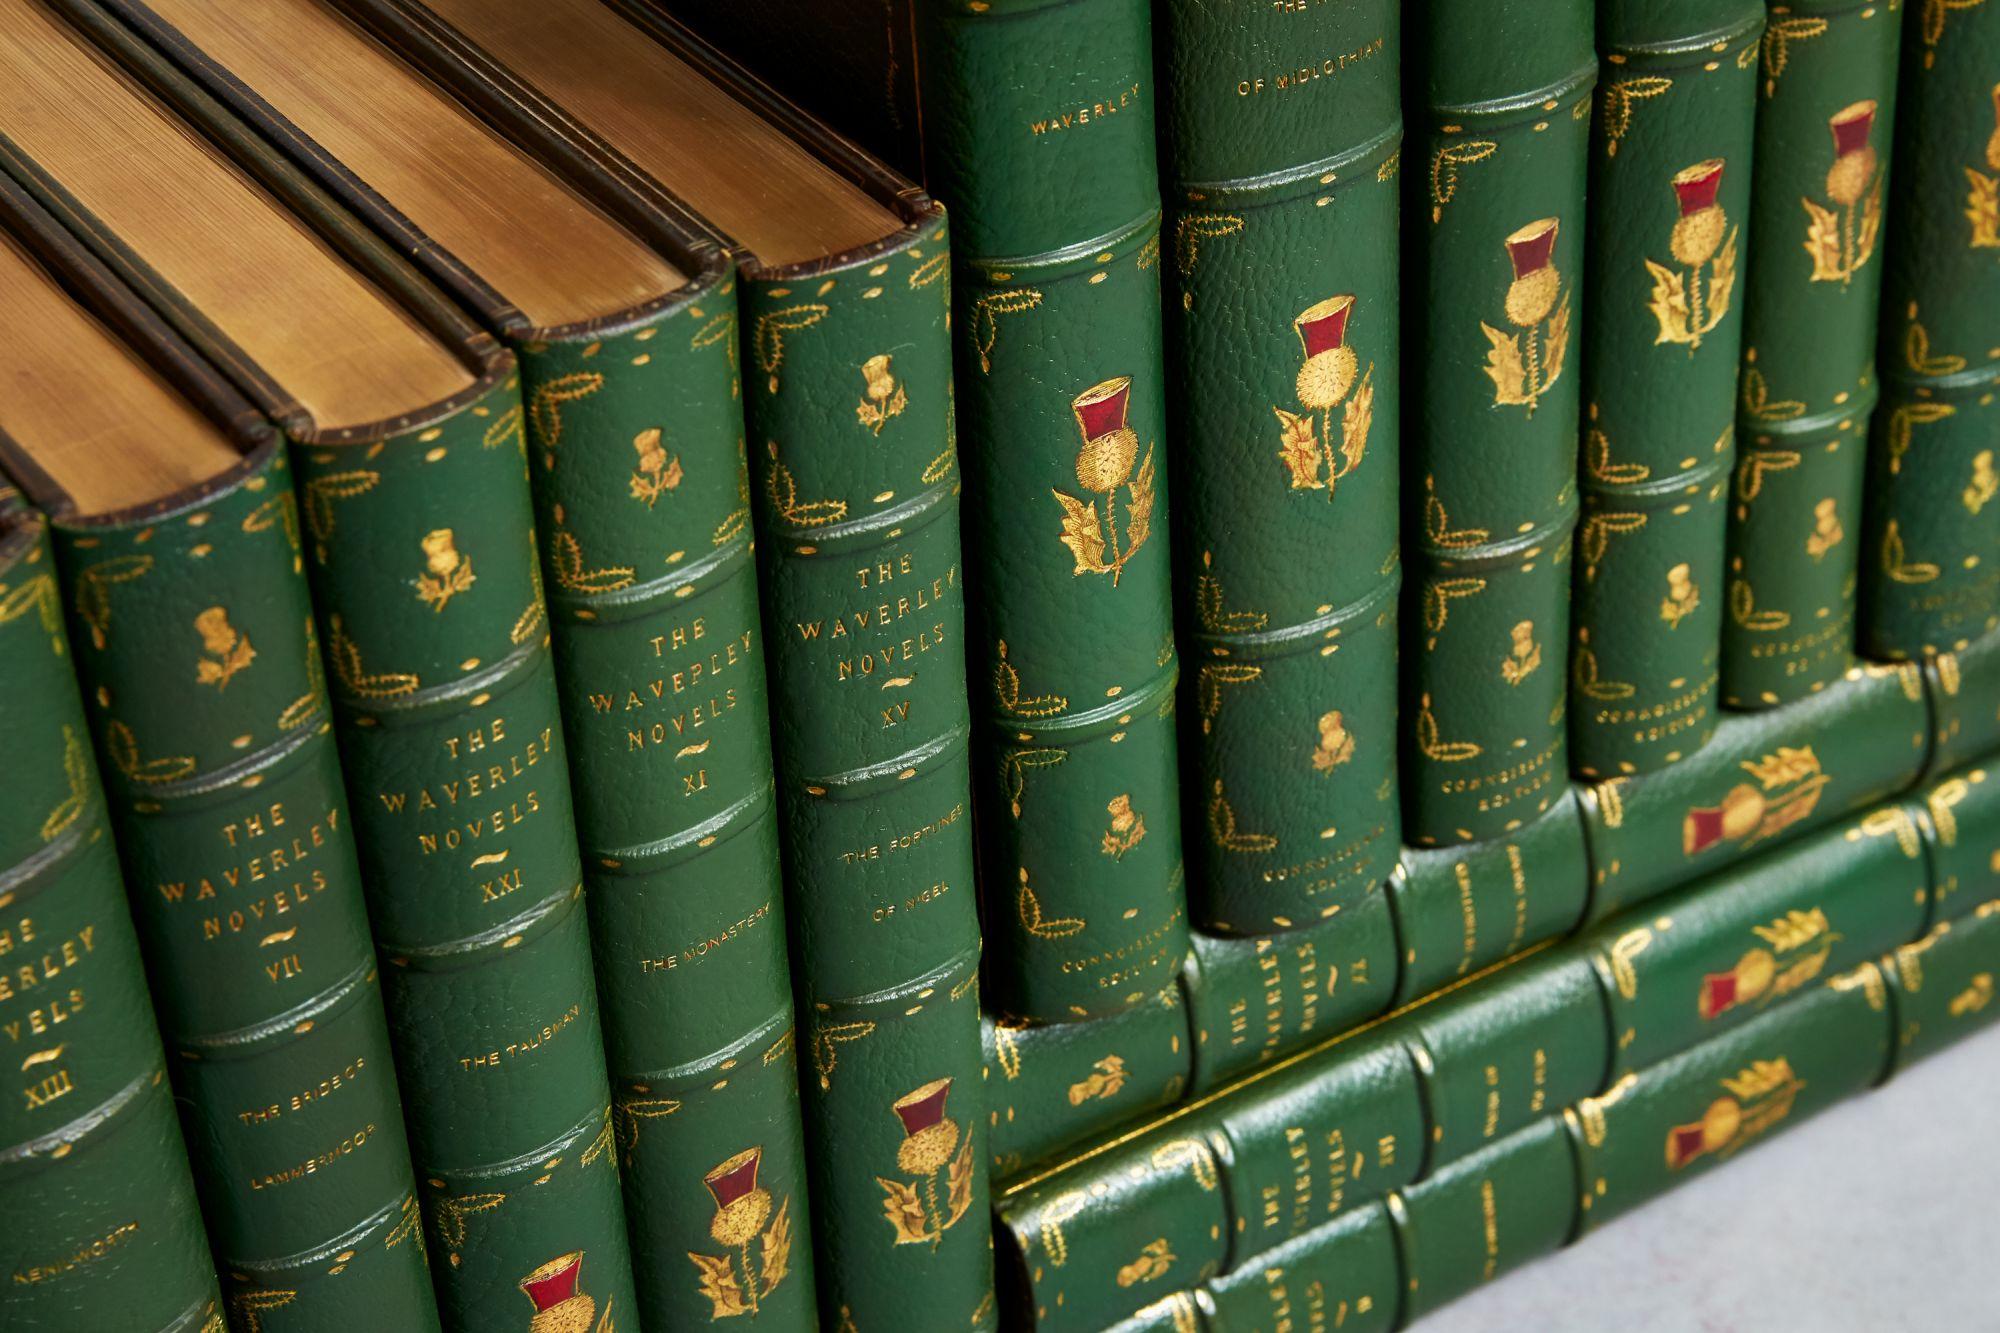 26 vols

“The Connoisseurs Edition” limited to 180 sets, this is #27.

Bound in full green Morocco, all edges gilt, raised bands, ornate gilt of Thistles and Crown on covers and spines. Illustrated with hand-colored frontispiece and other black